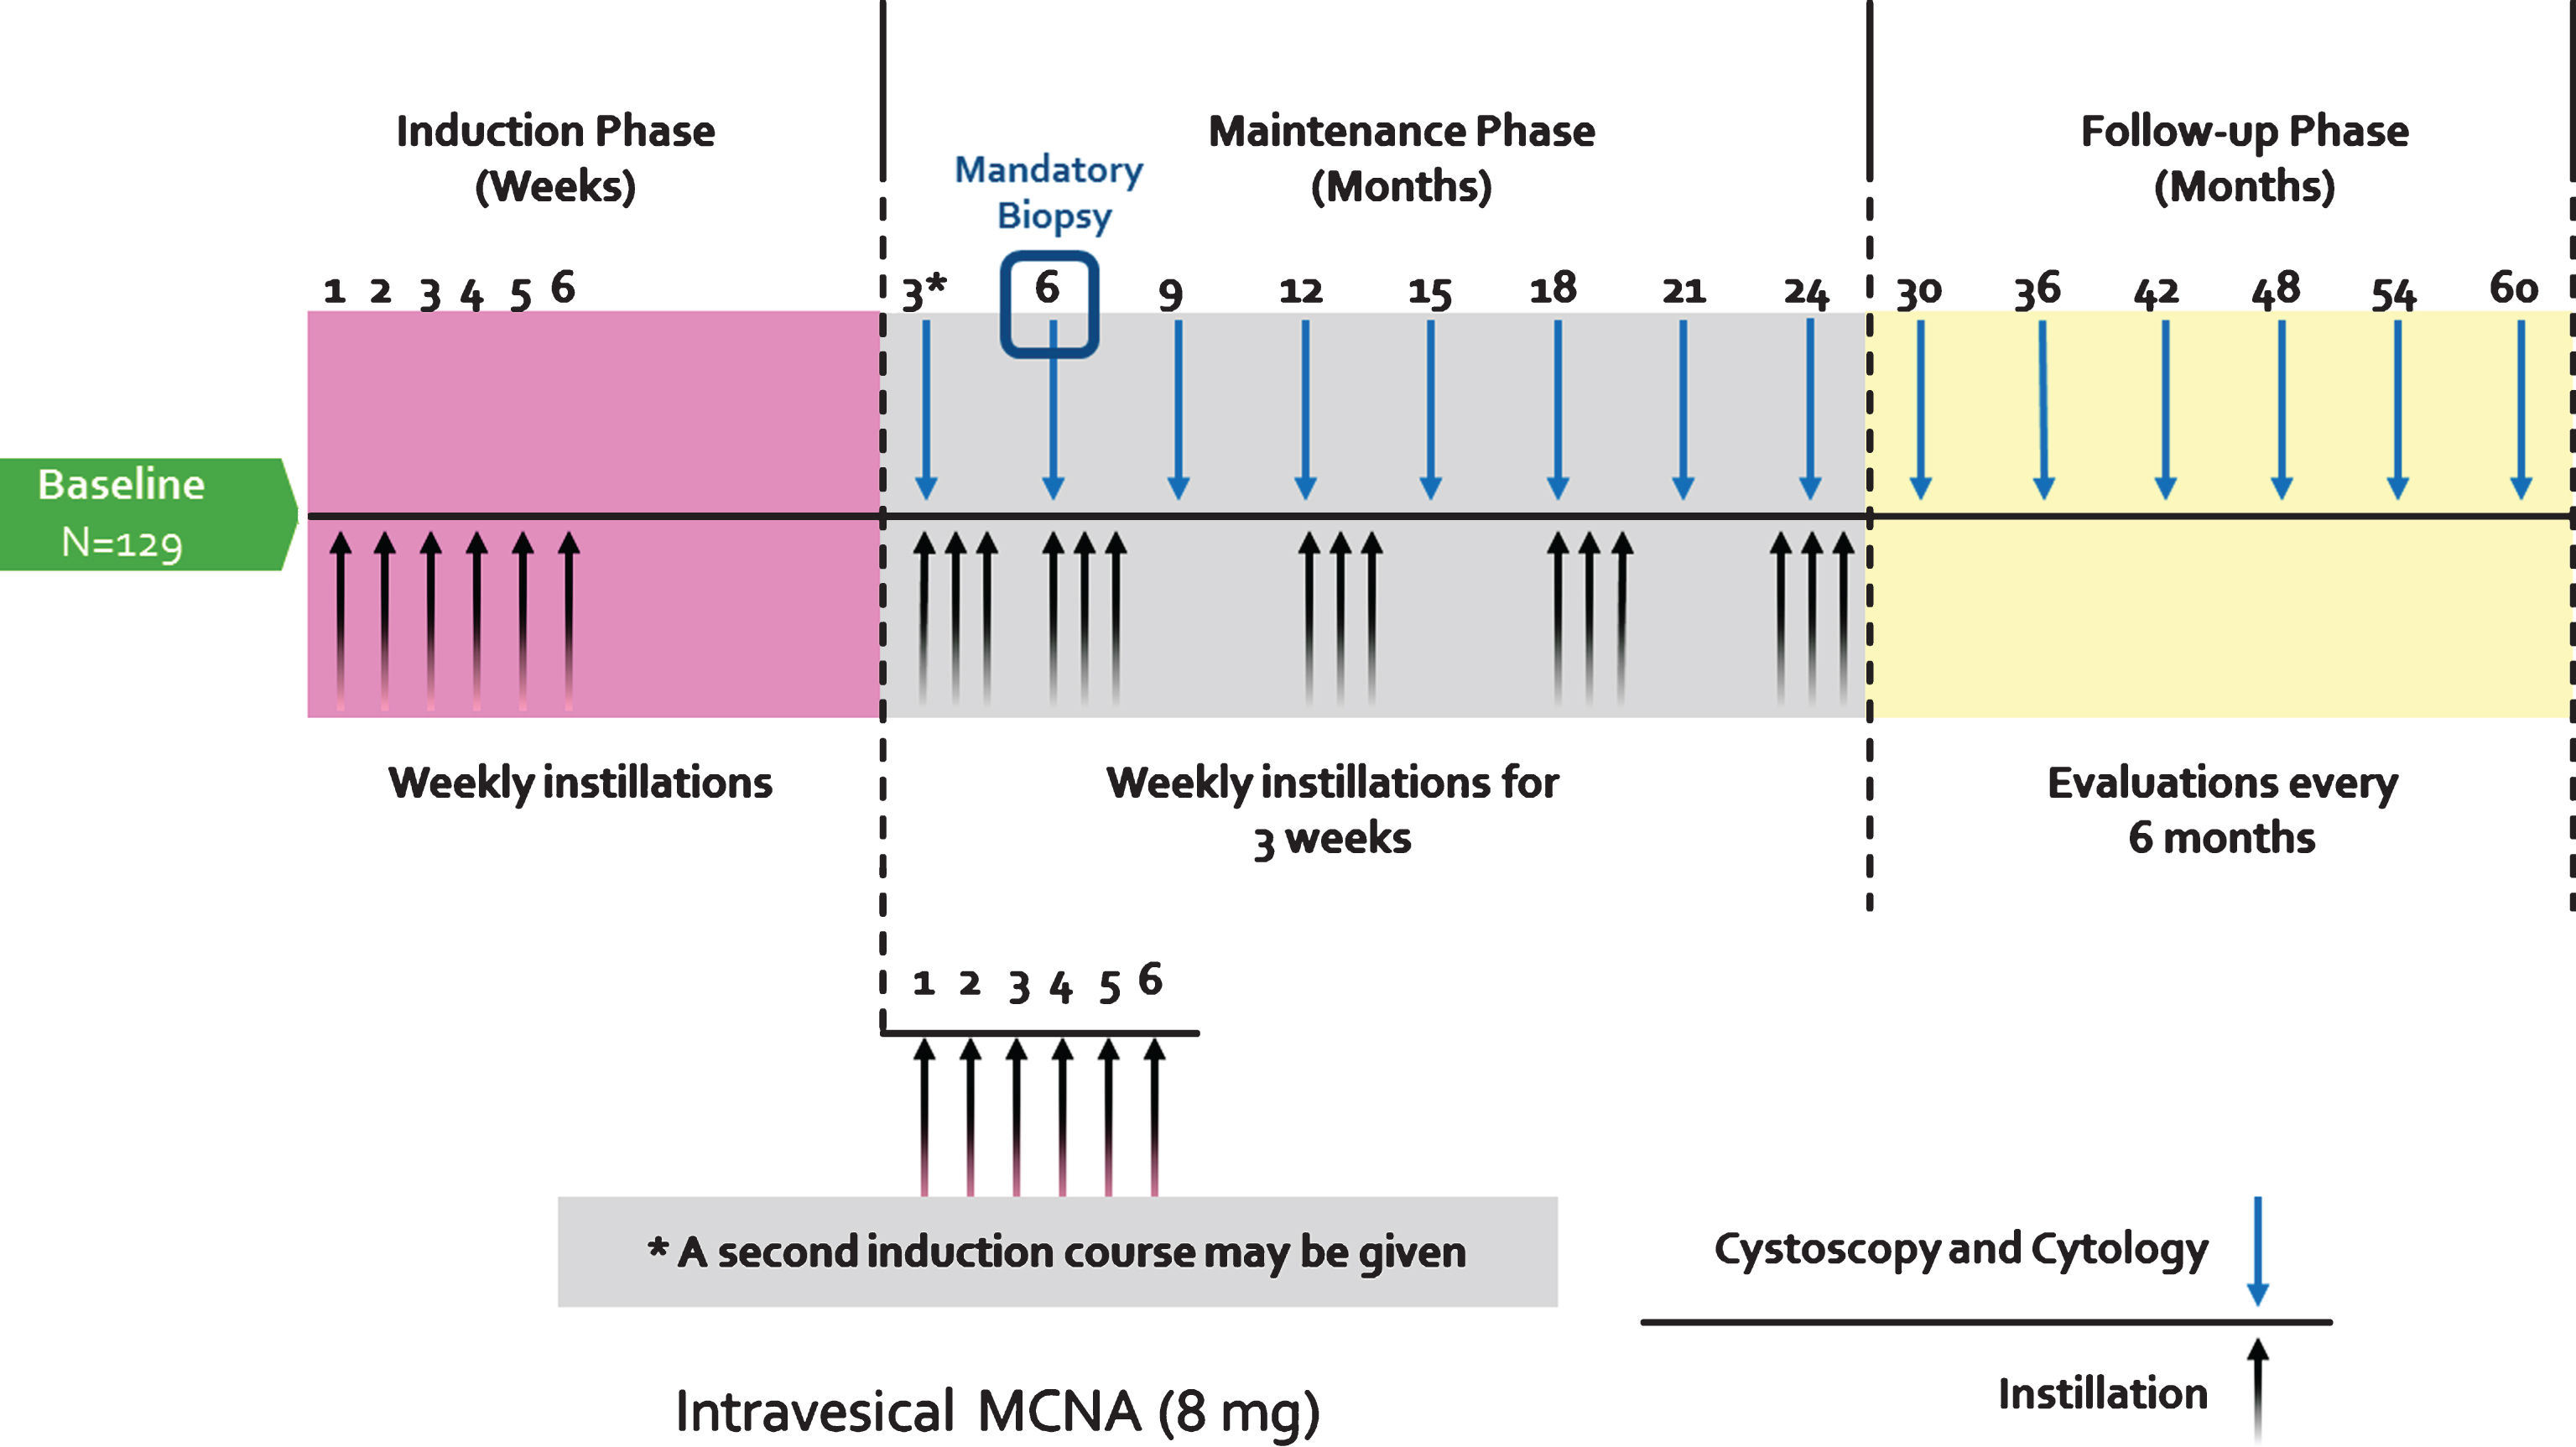 MCNA instillation and followup protocol. A 6-weekly induction phase (8 mg in 50 mL) was followed by a maintenance phase in which patients received 3 or 6 (re-induction) weekly MCNA instillations at month 3 followed by 3 weekly instillations each at months 6, 12, 18 and 24, and 36. During the follow-up phase, cystoscopic evaluations and urine cytologies were conducted every 6 months. (Figure adopted from Morales et al. [1]).